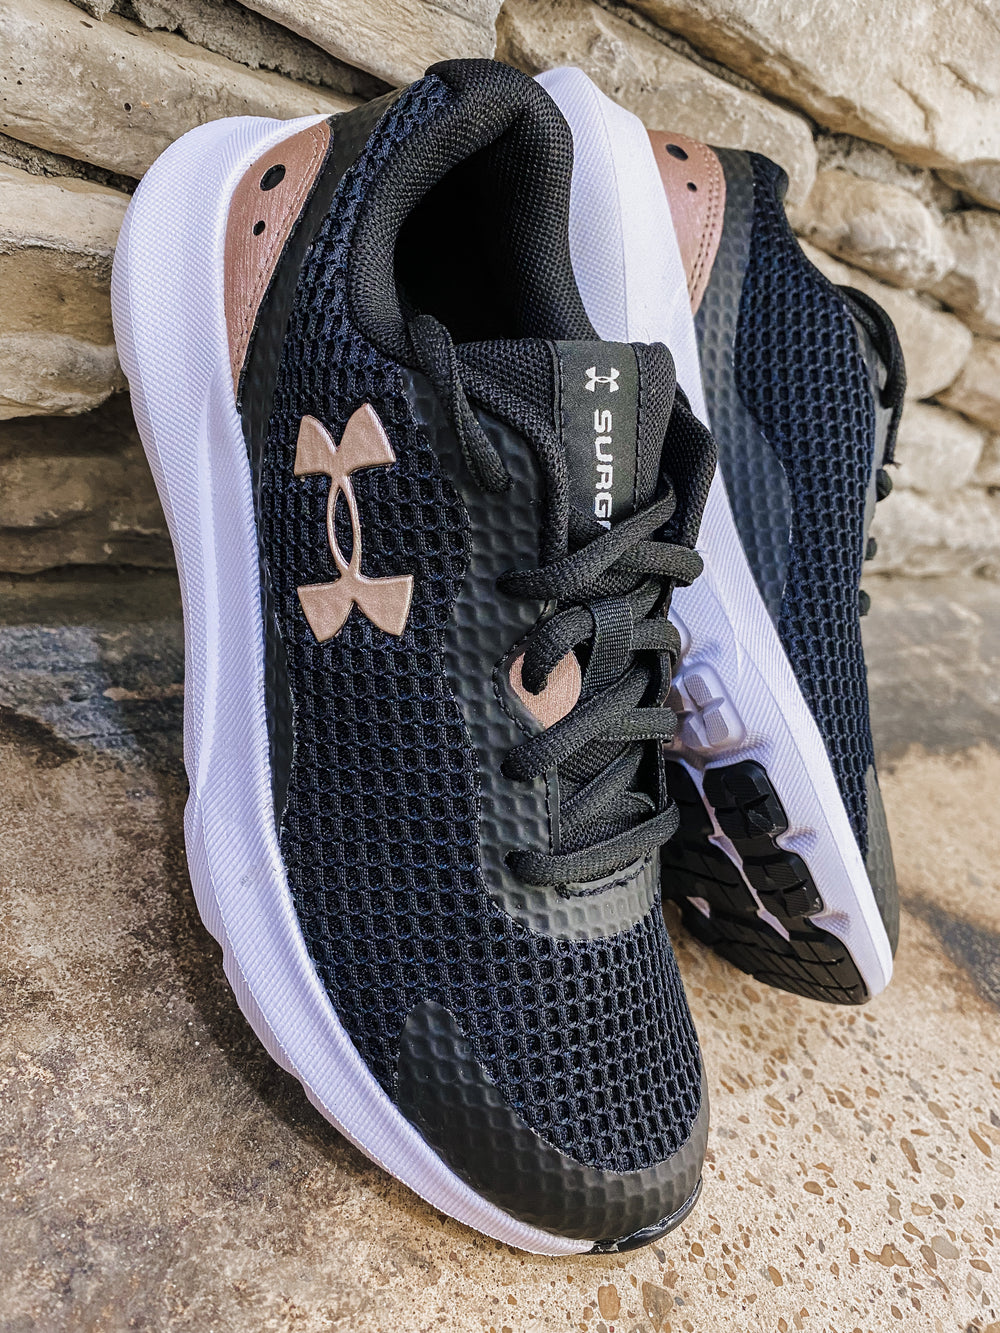 Under Armour Women's Surge 3 Running Shoes – Dales Clothing Inc